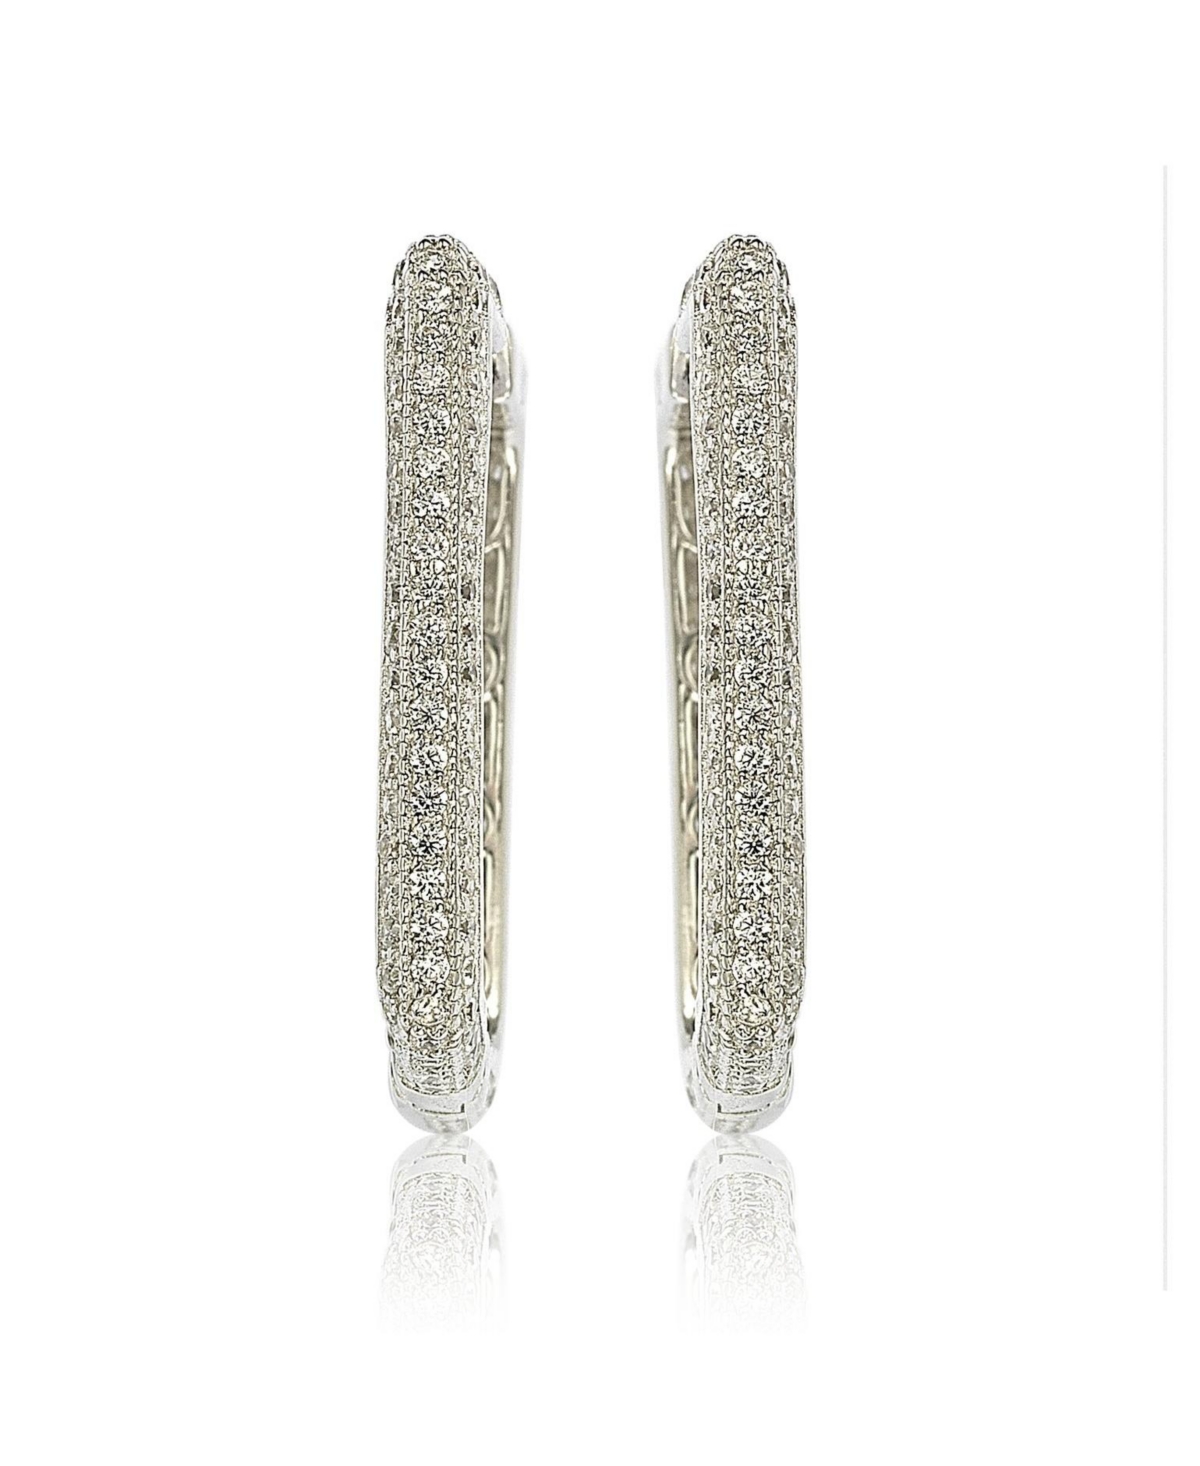 Suzy Levian Sterling Silver Cubic Zirconia Pave Square Modern Hoop Earrings - White